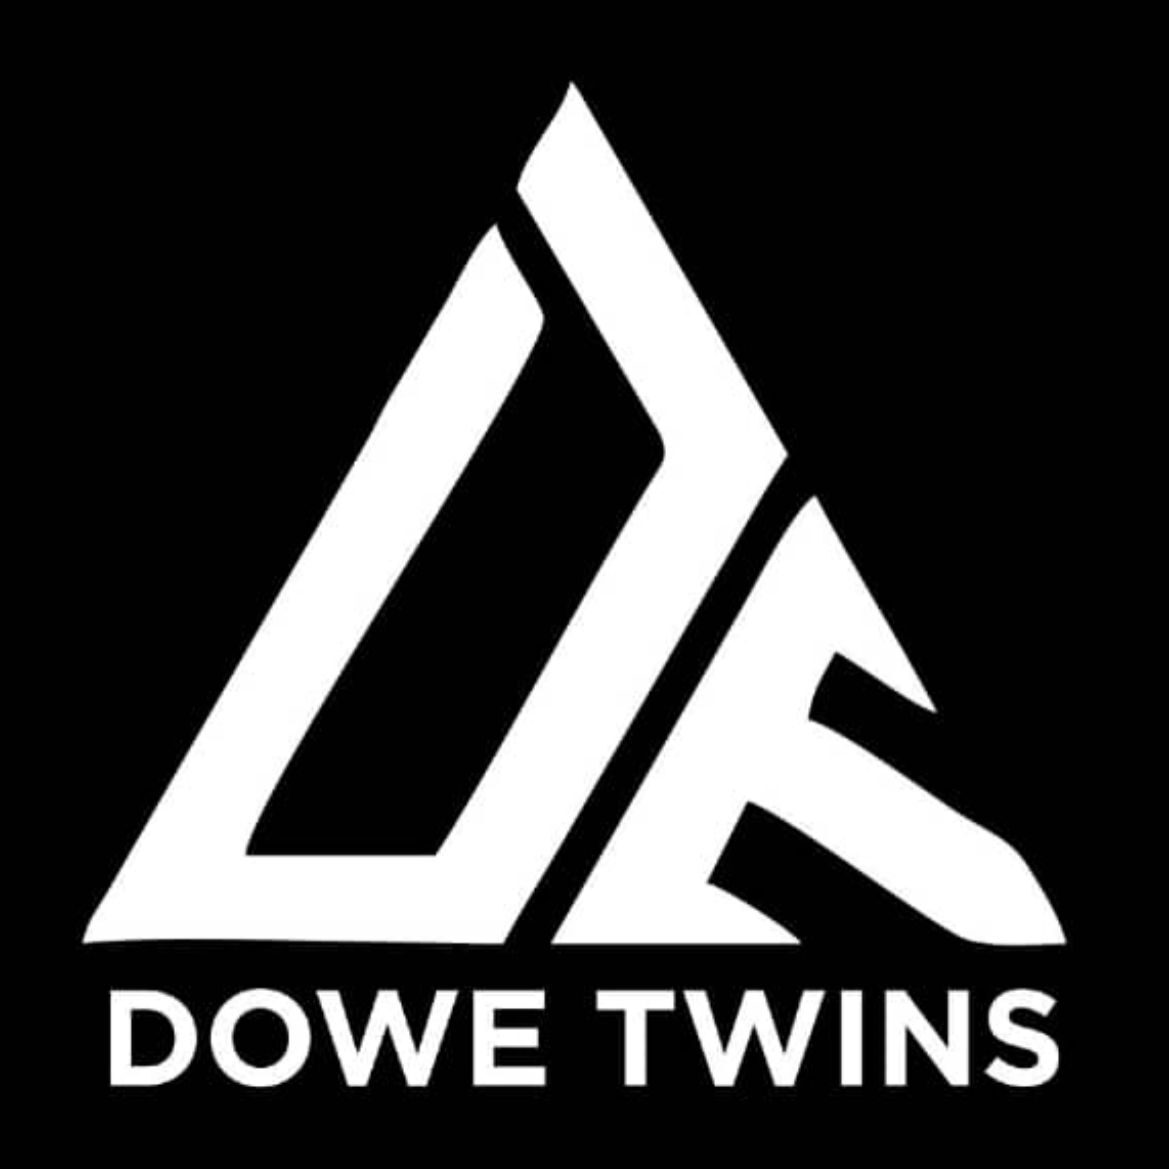 The Dowe Twins Store